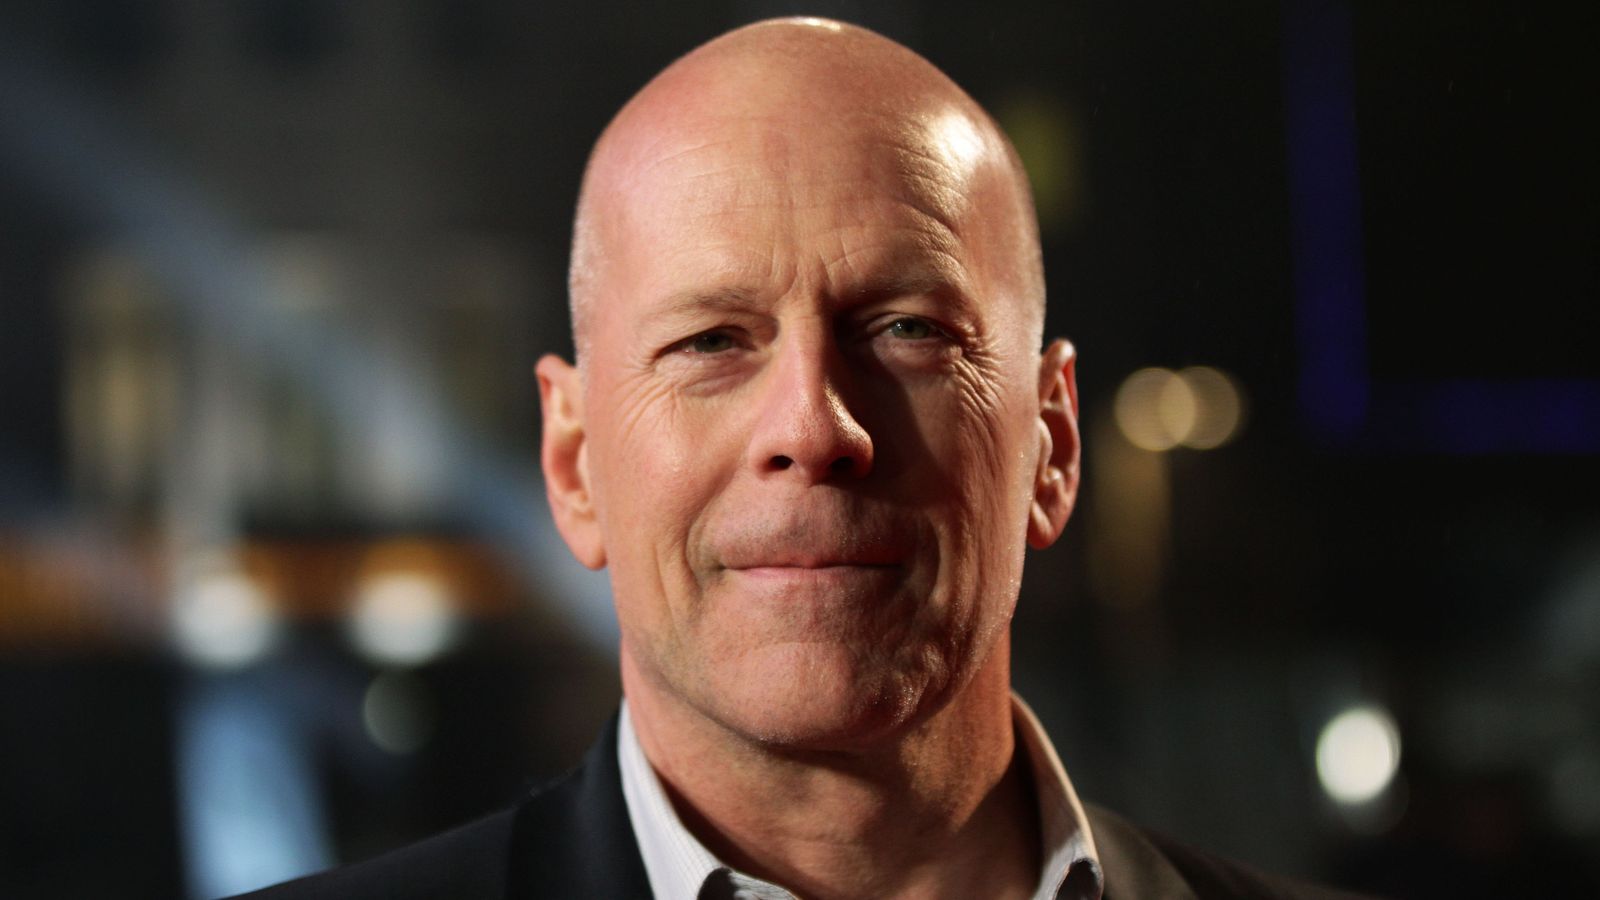 Bruce Willis's wife asks paparazzi to 'keep your space' and not 'yell' at him after dementia diagnosis